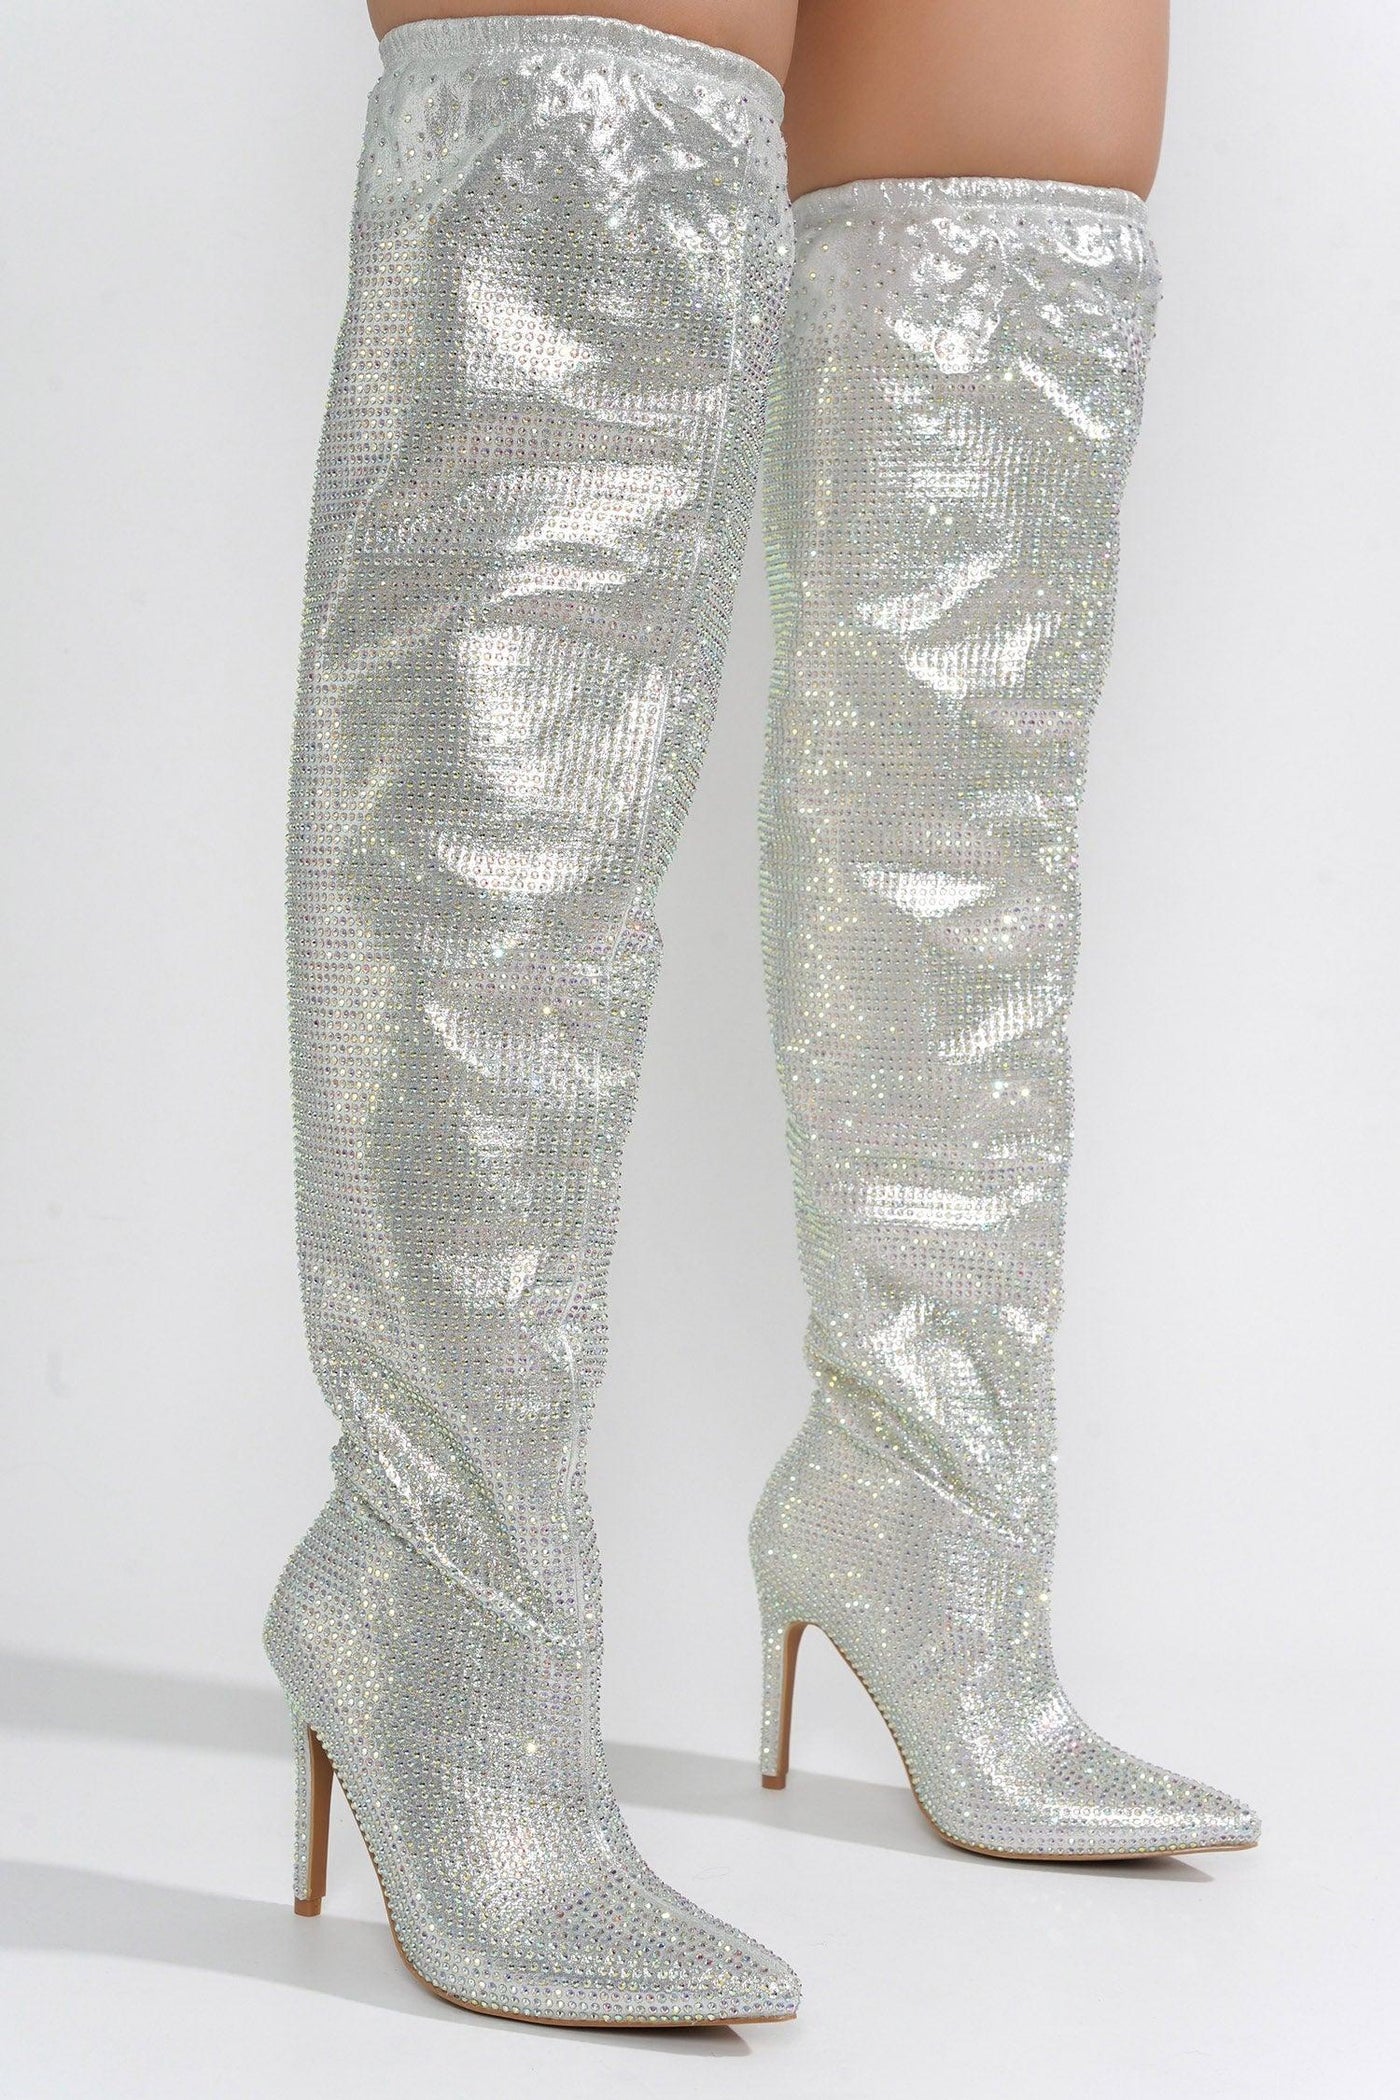 HELOMA - SILVER Thigh High Boots